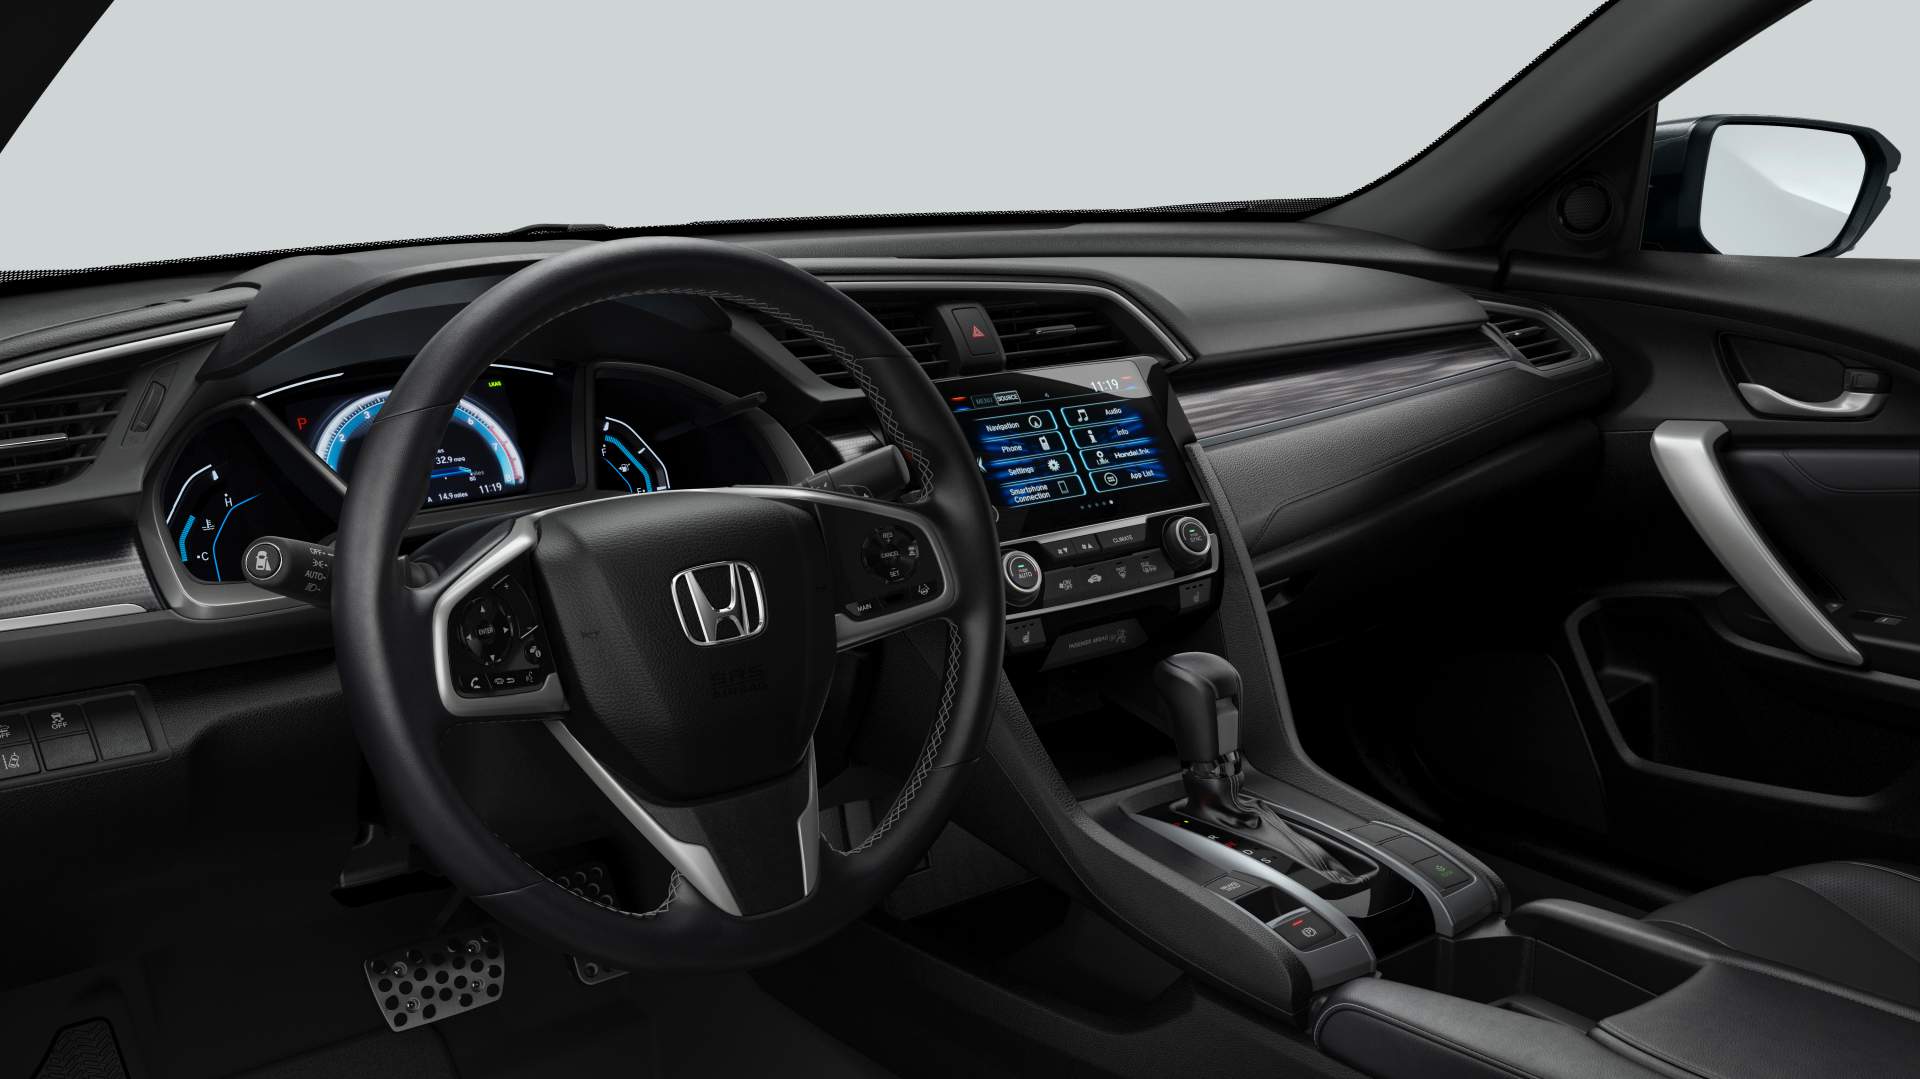 Honda Details 2019 Civic Sedan And Coupe Updates Releases